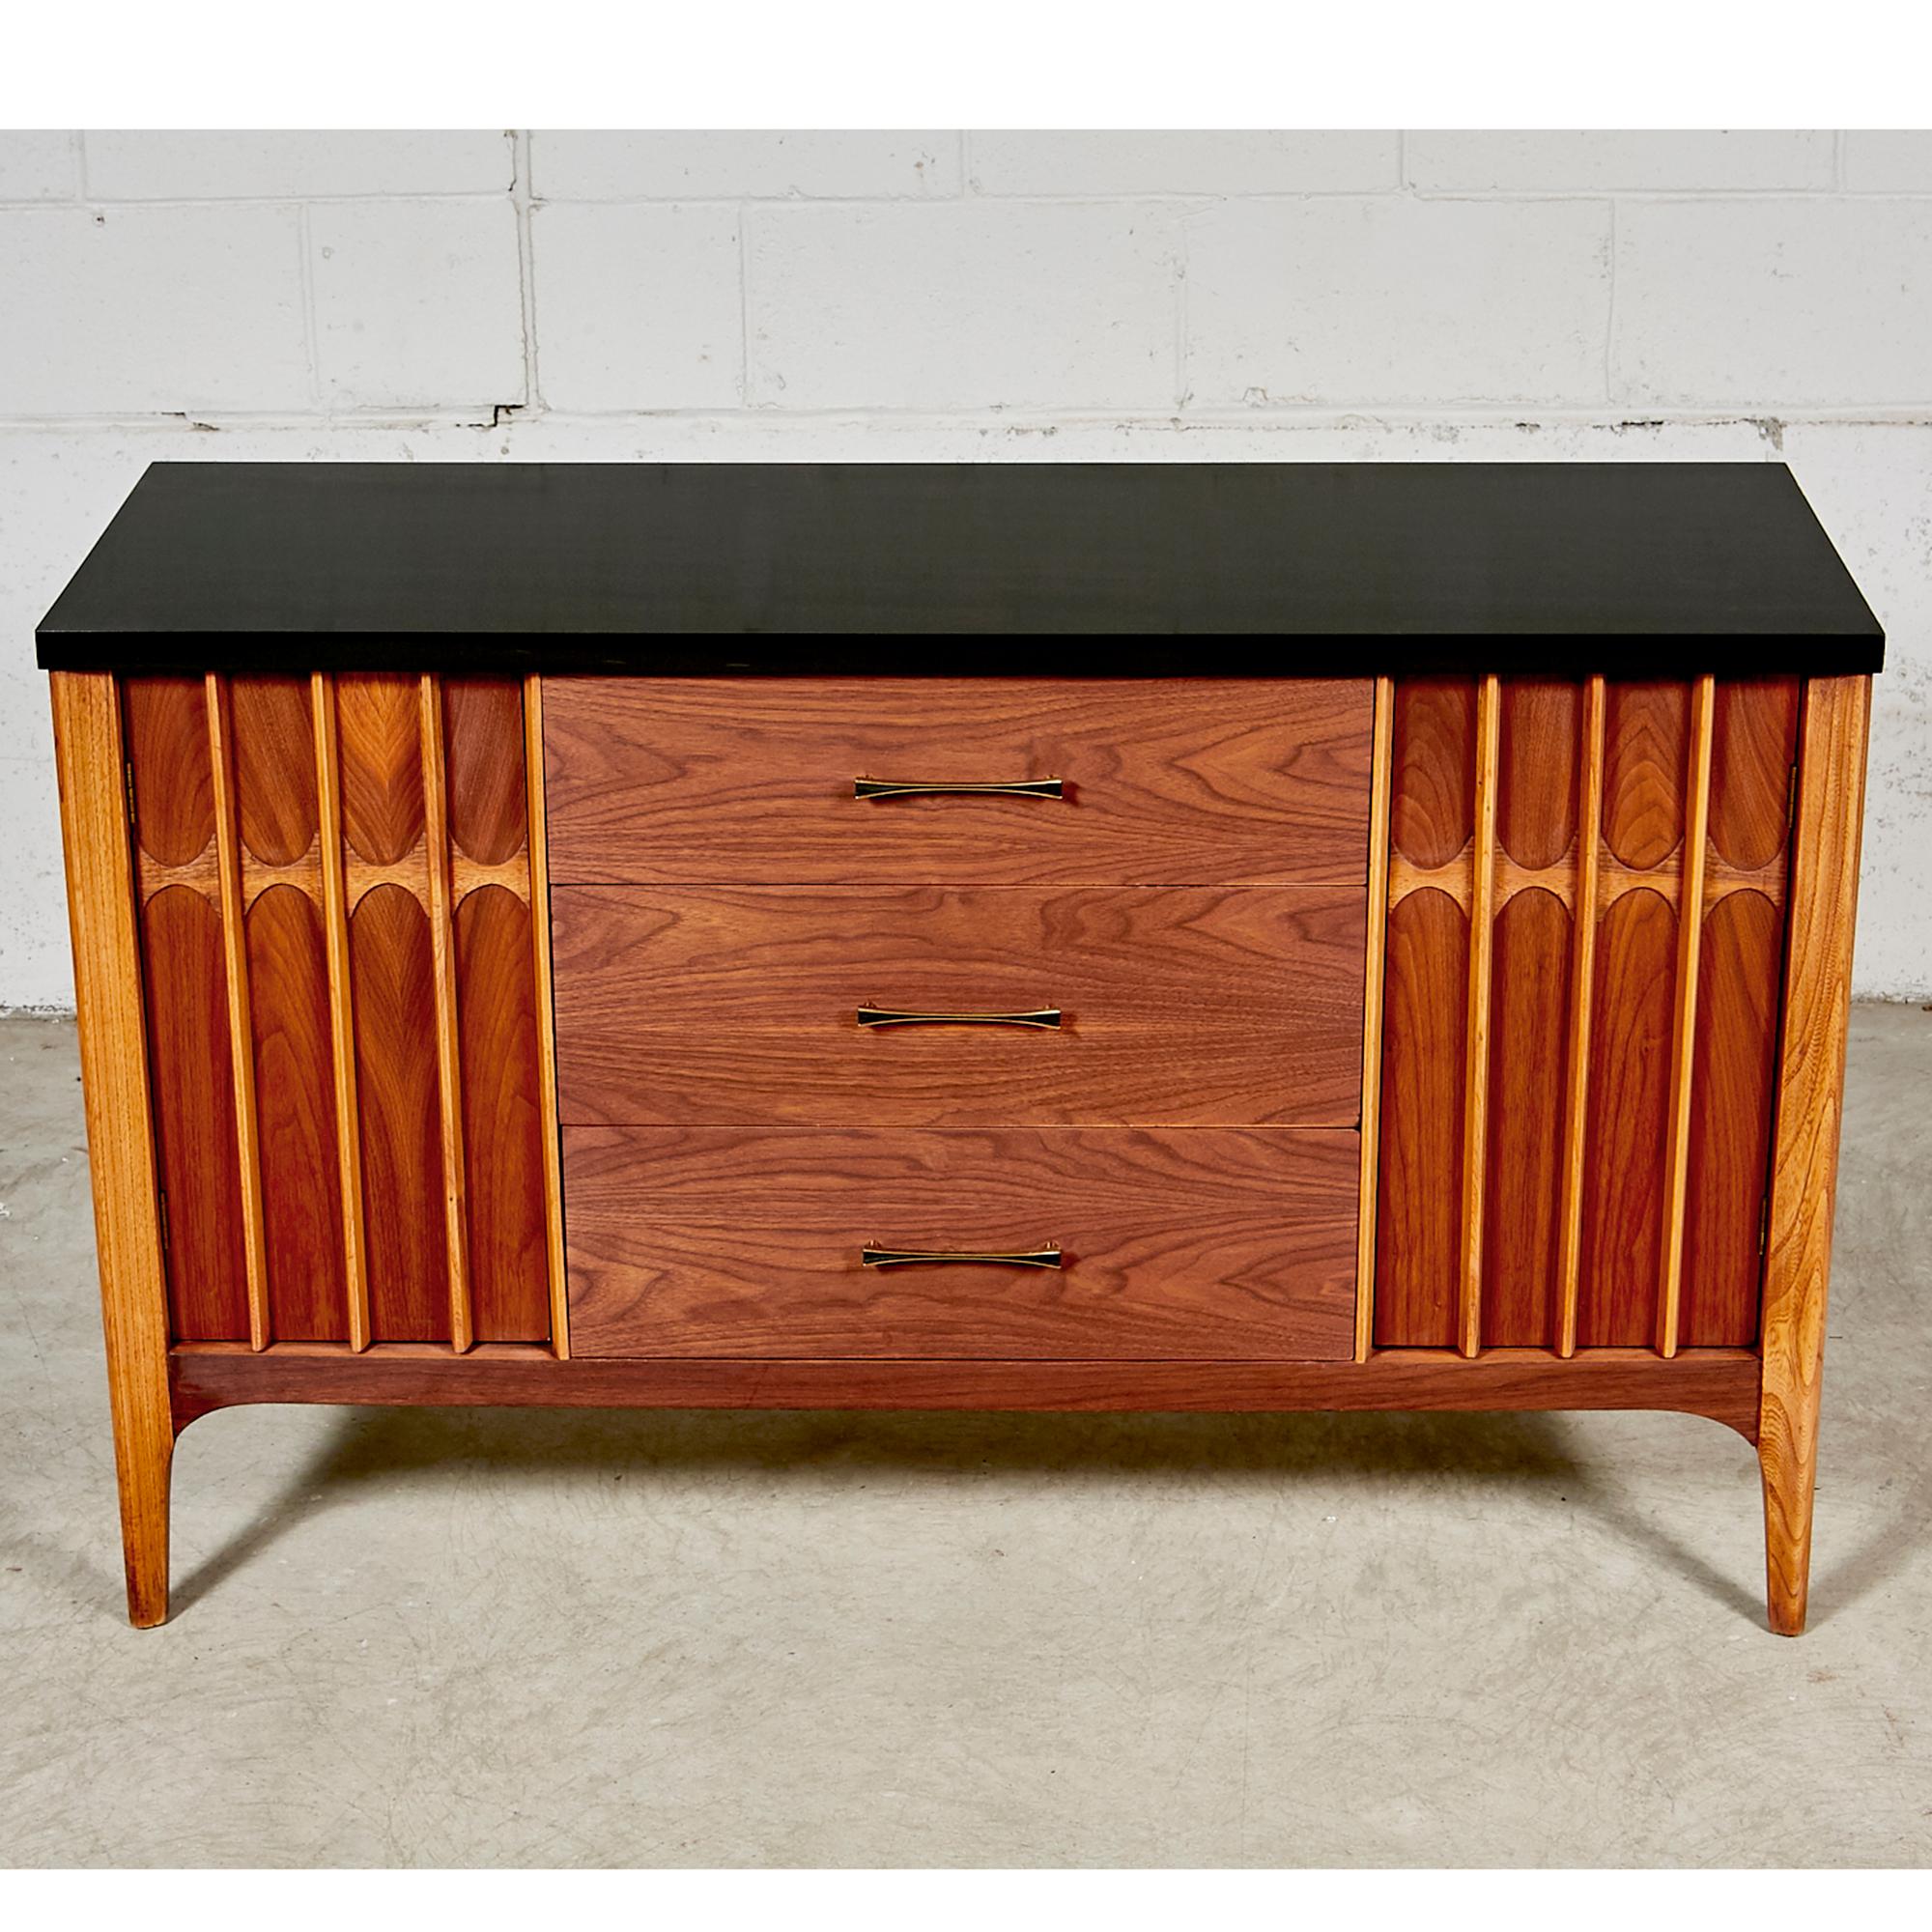 Vintage 1960s walnut wood and black painted top credenza from the Brasilia line of furniture. The credenza has three drawers for storage with additional side shelving. Newly refinished condition.